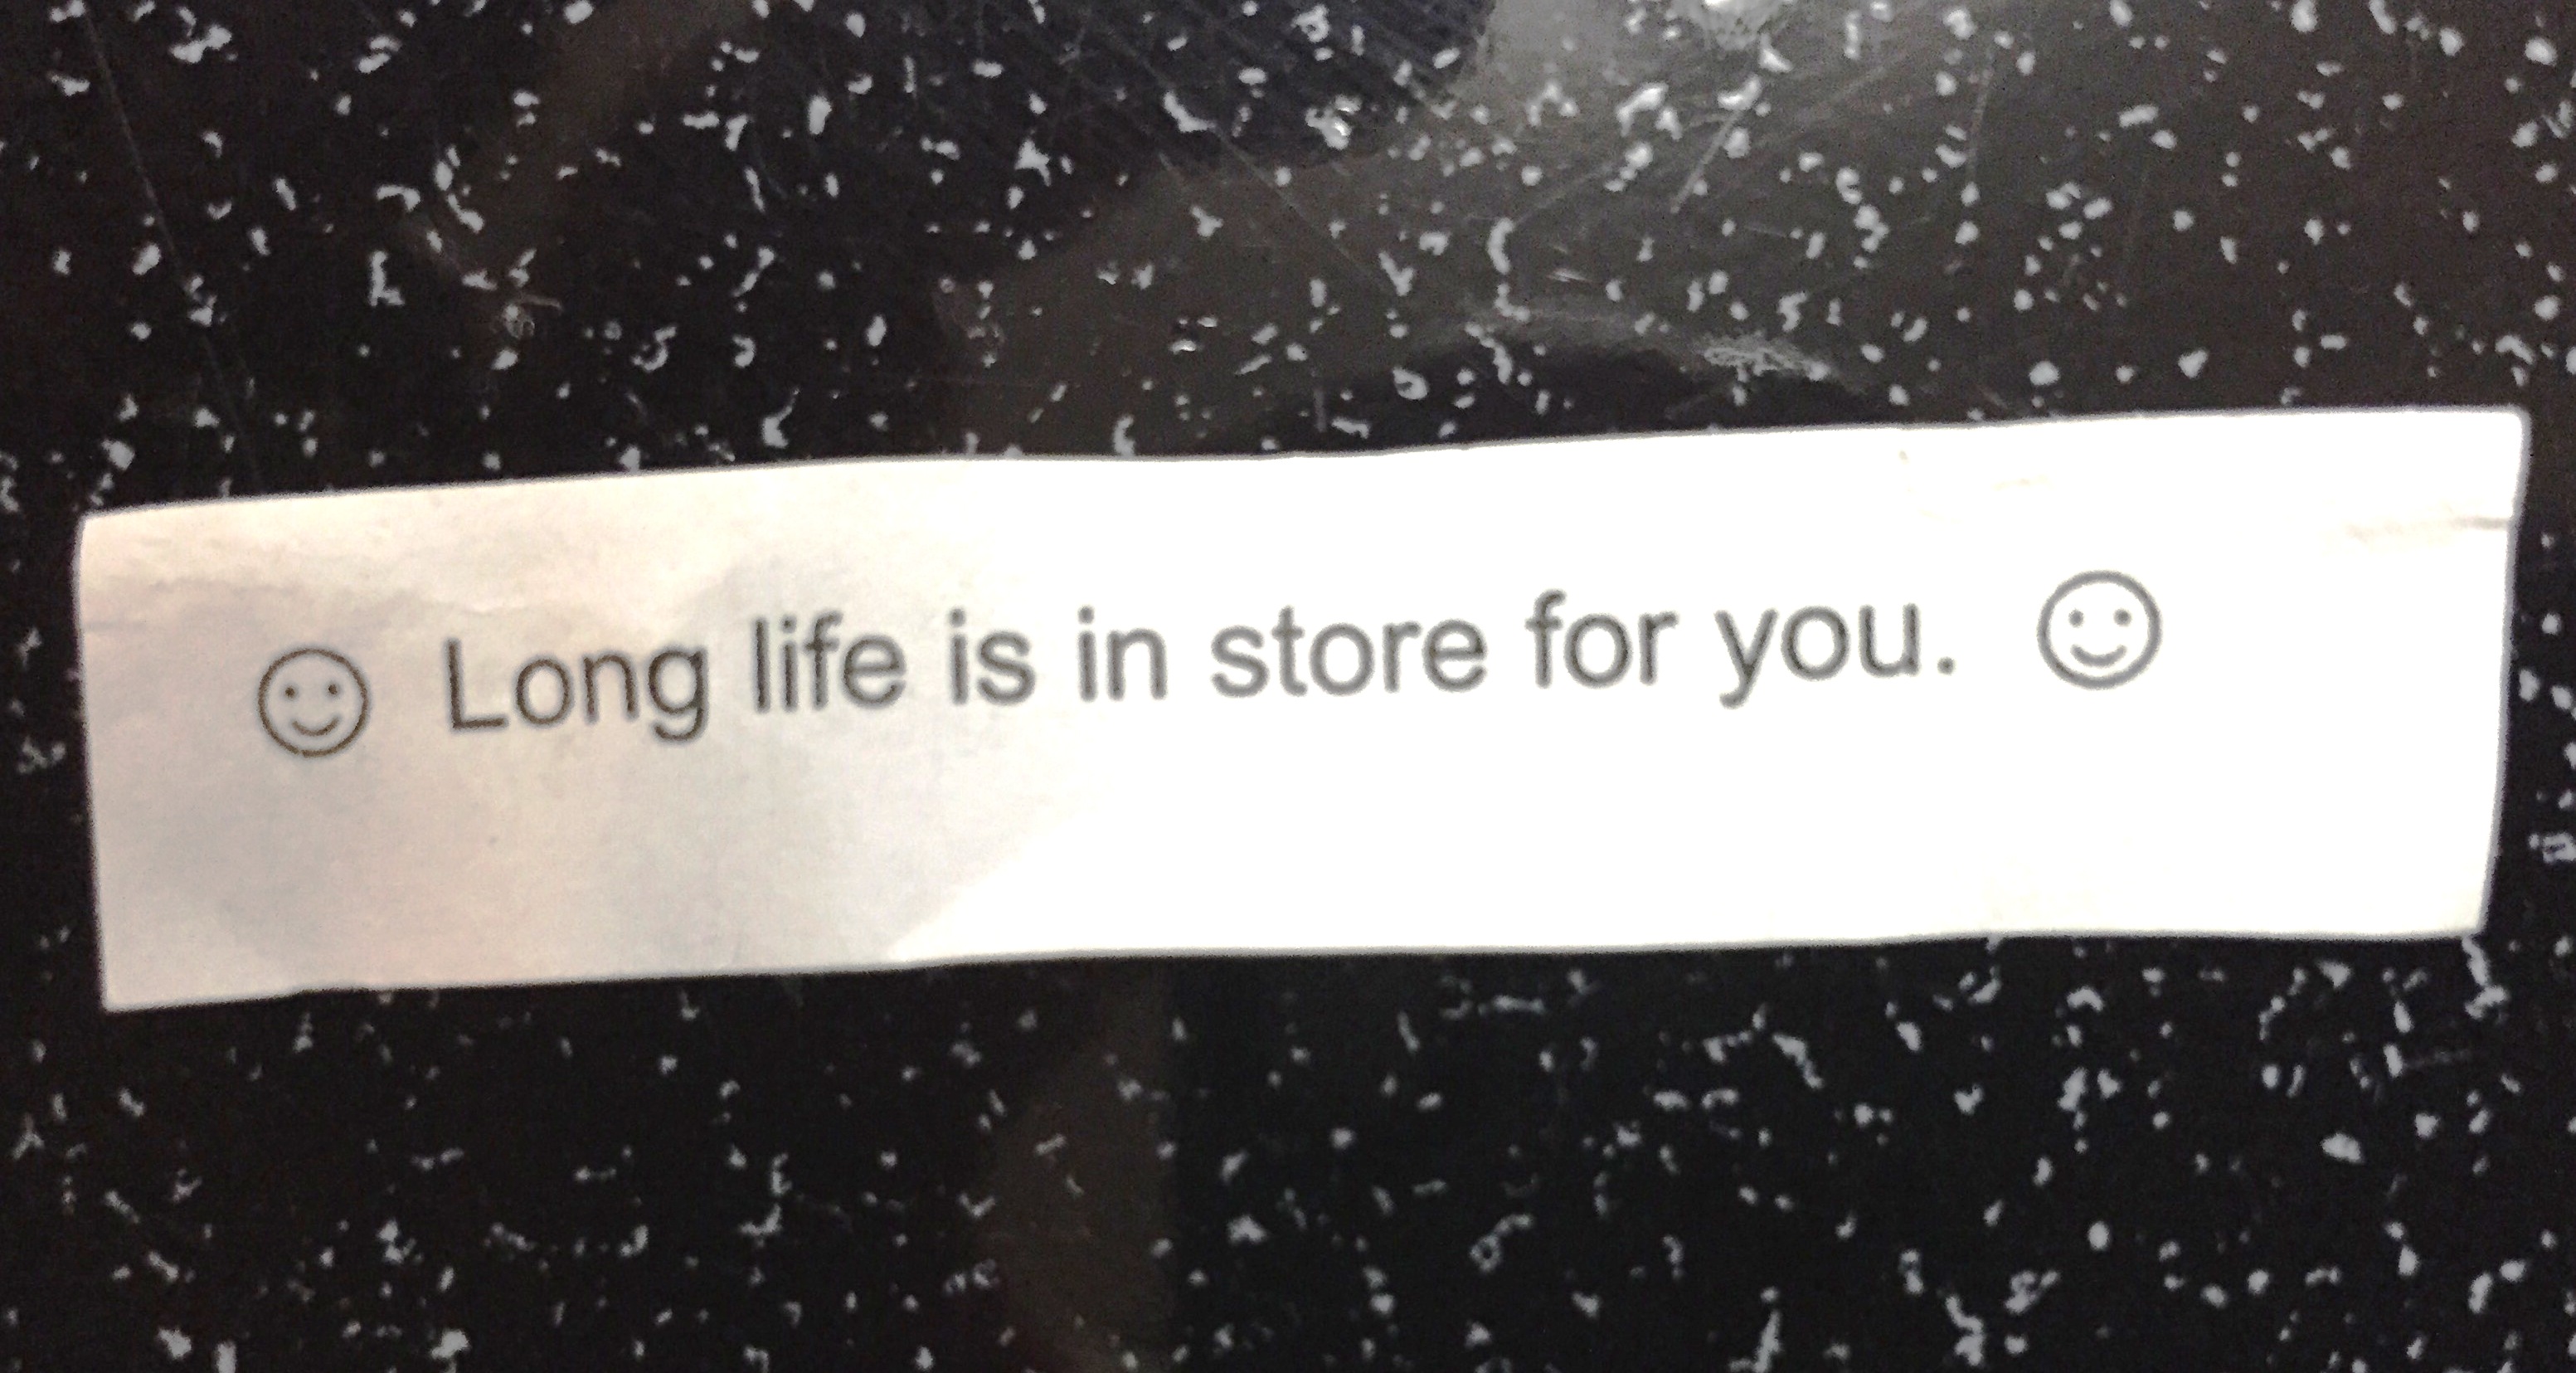 The fortune from my fortune cookie.jpg